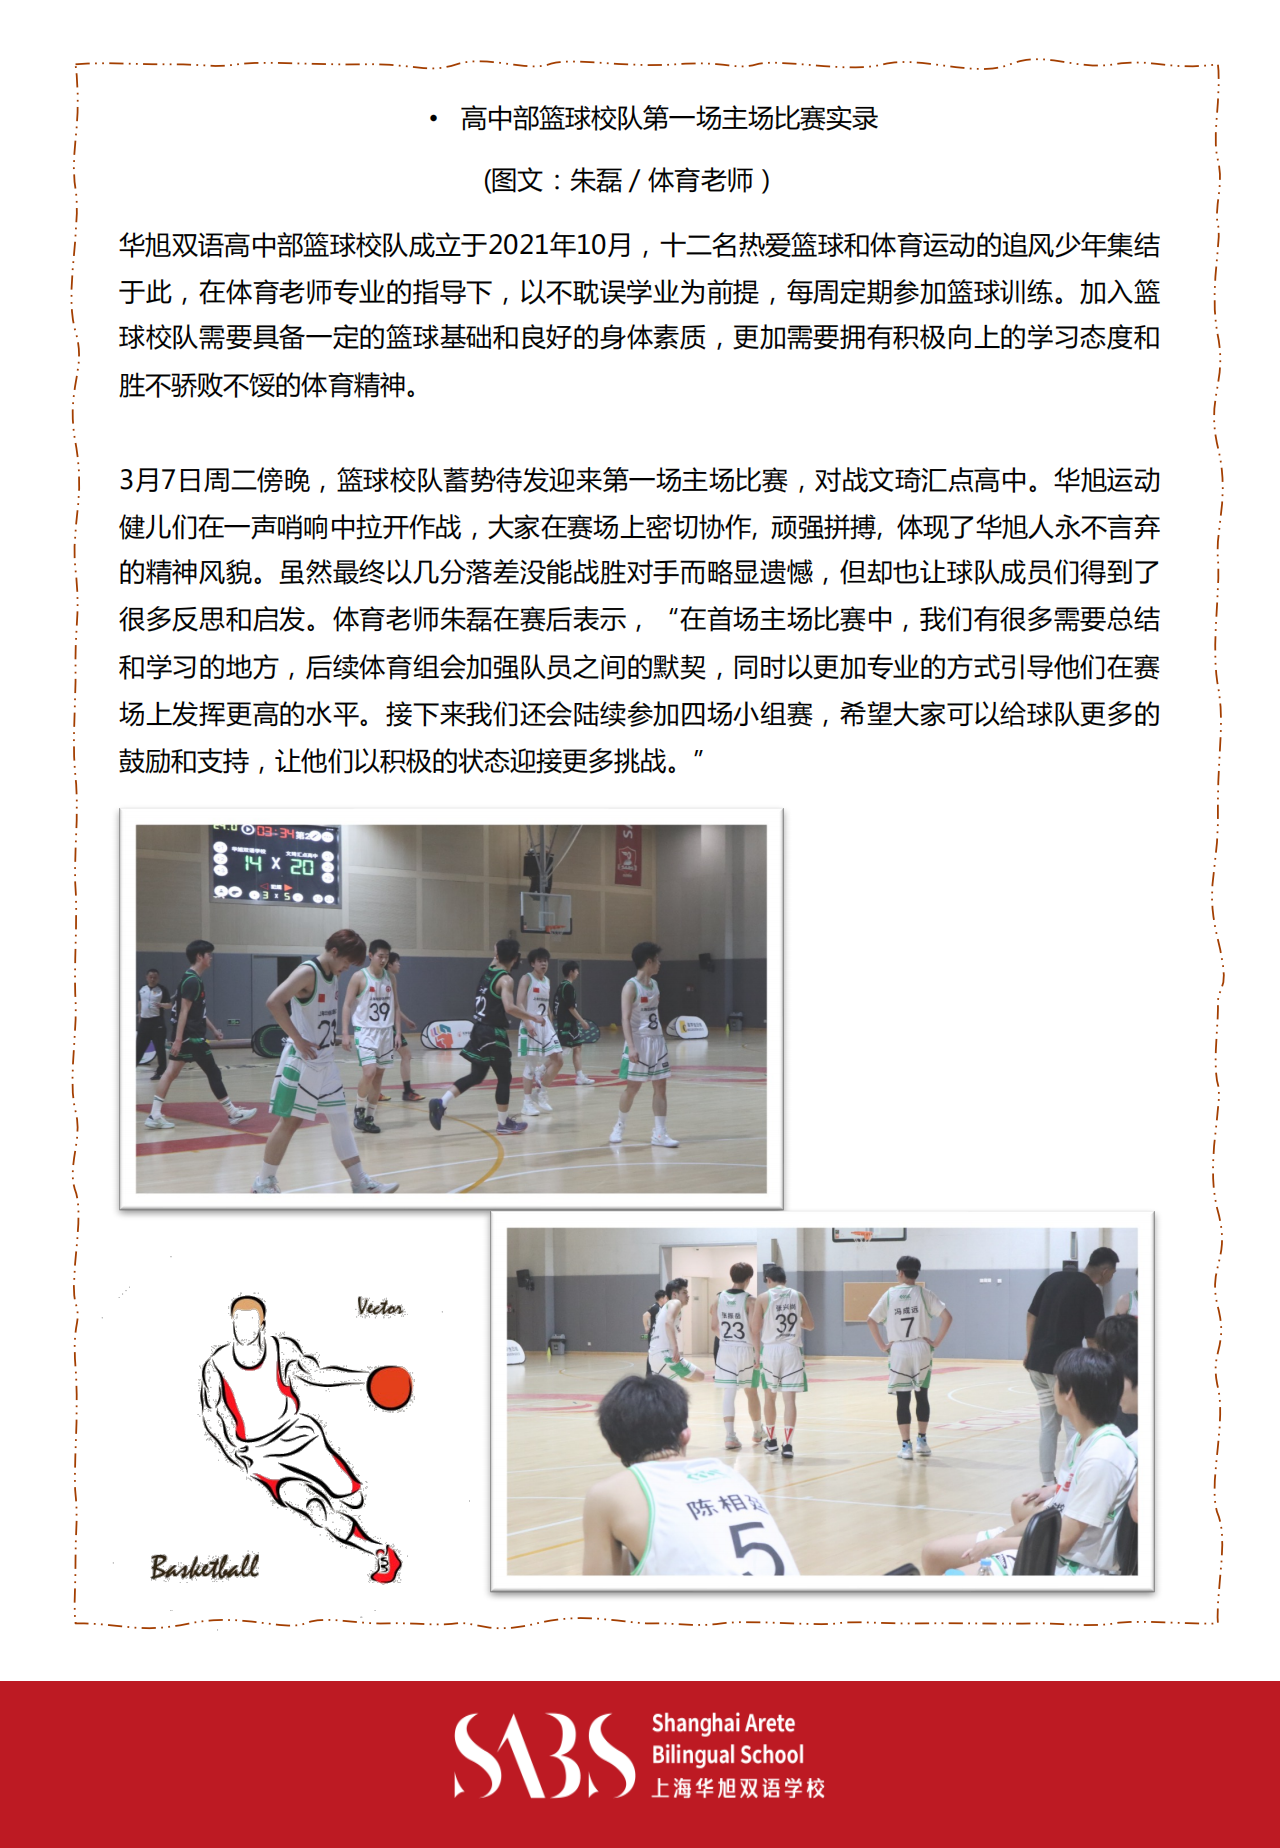 HS 2nd Issue Newsletter pptx（中文）_13.png